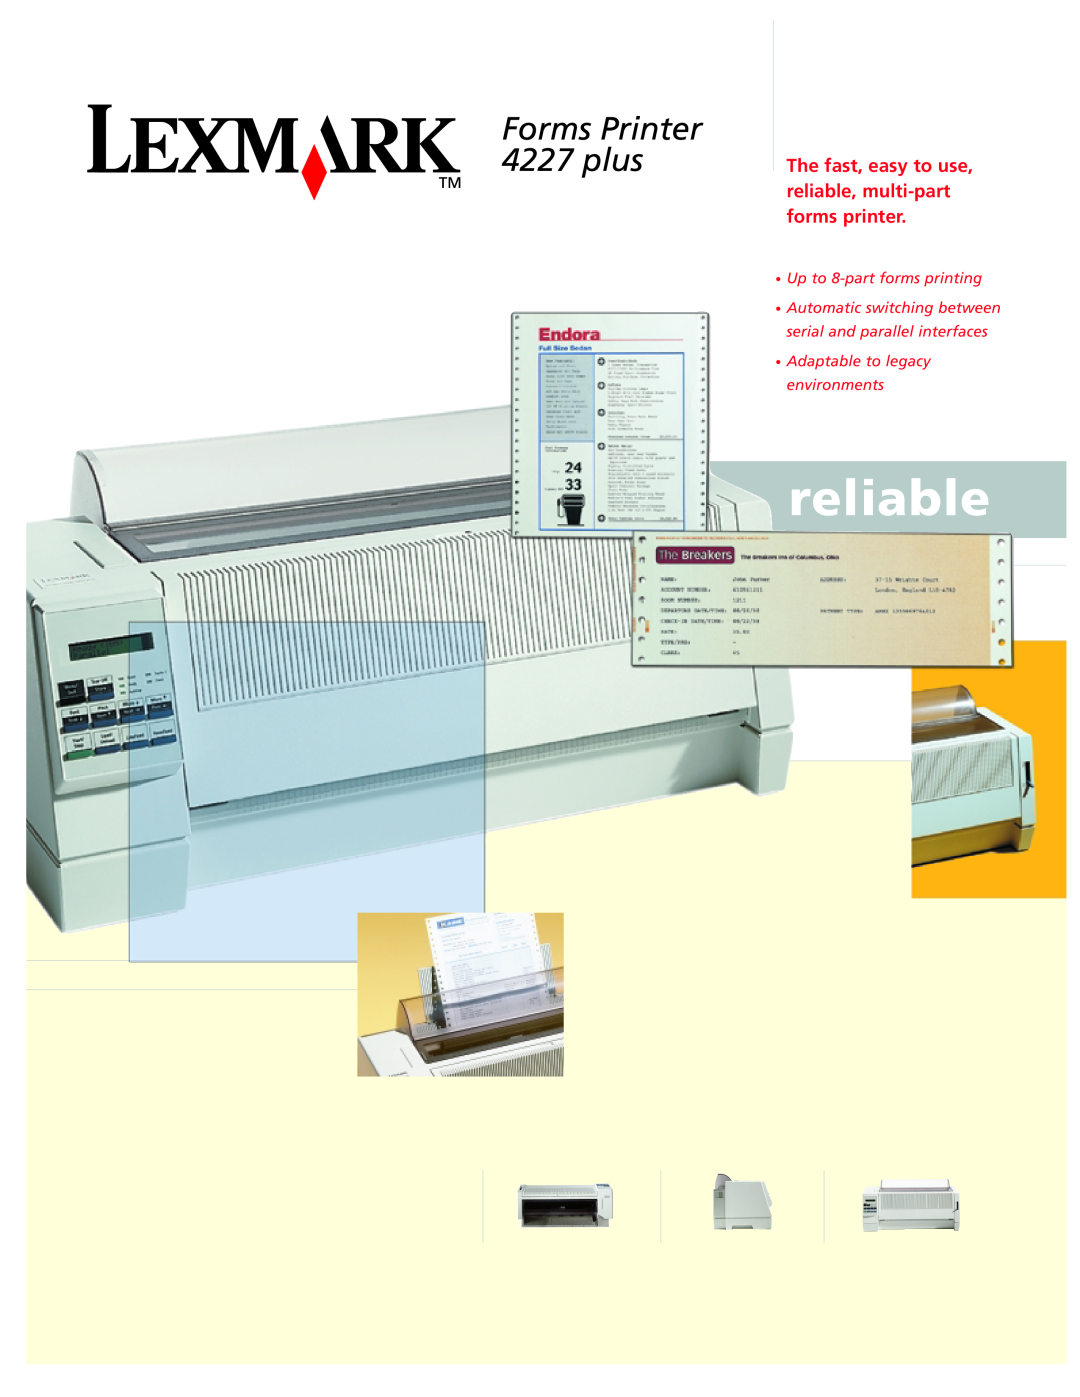 Lexmark 4227 PLUS manual reliable, Up to 8-partforms printing, Adaptable to legacy environments 